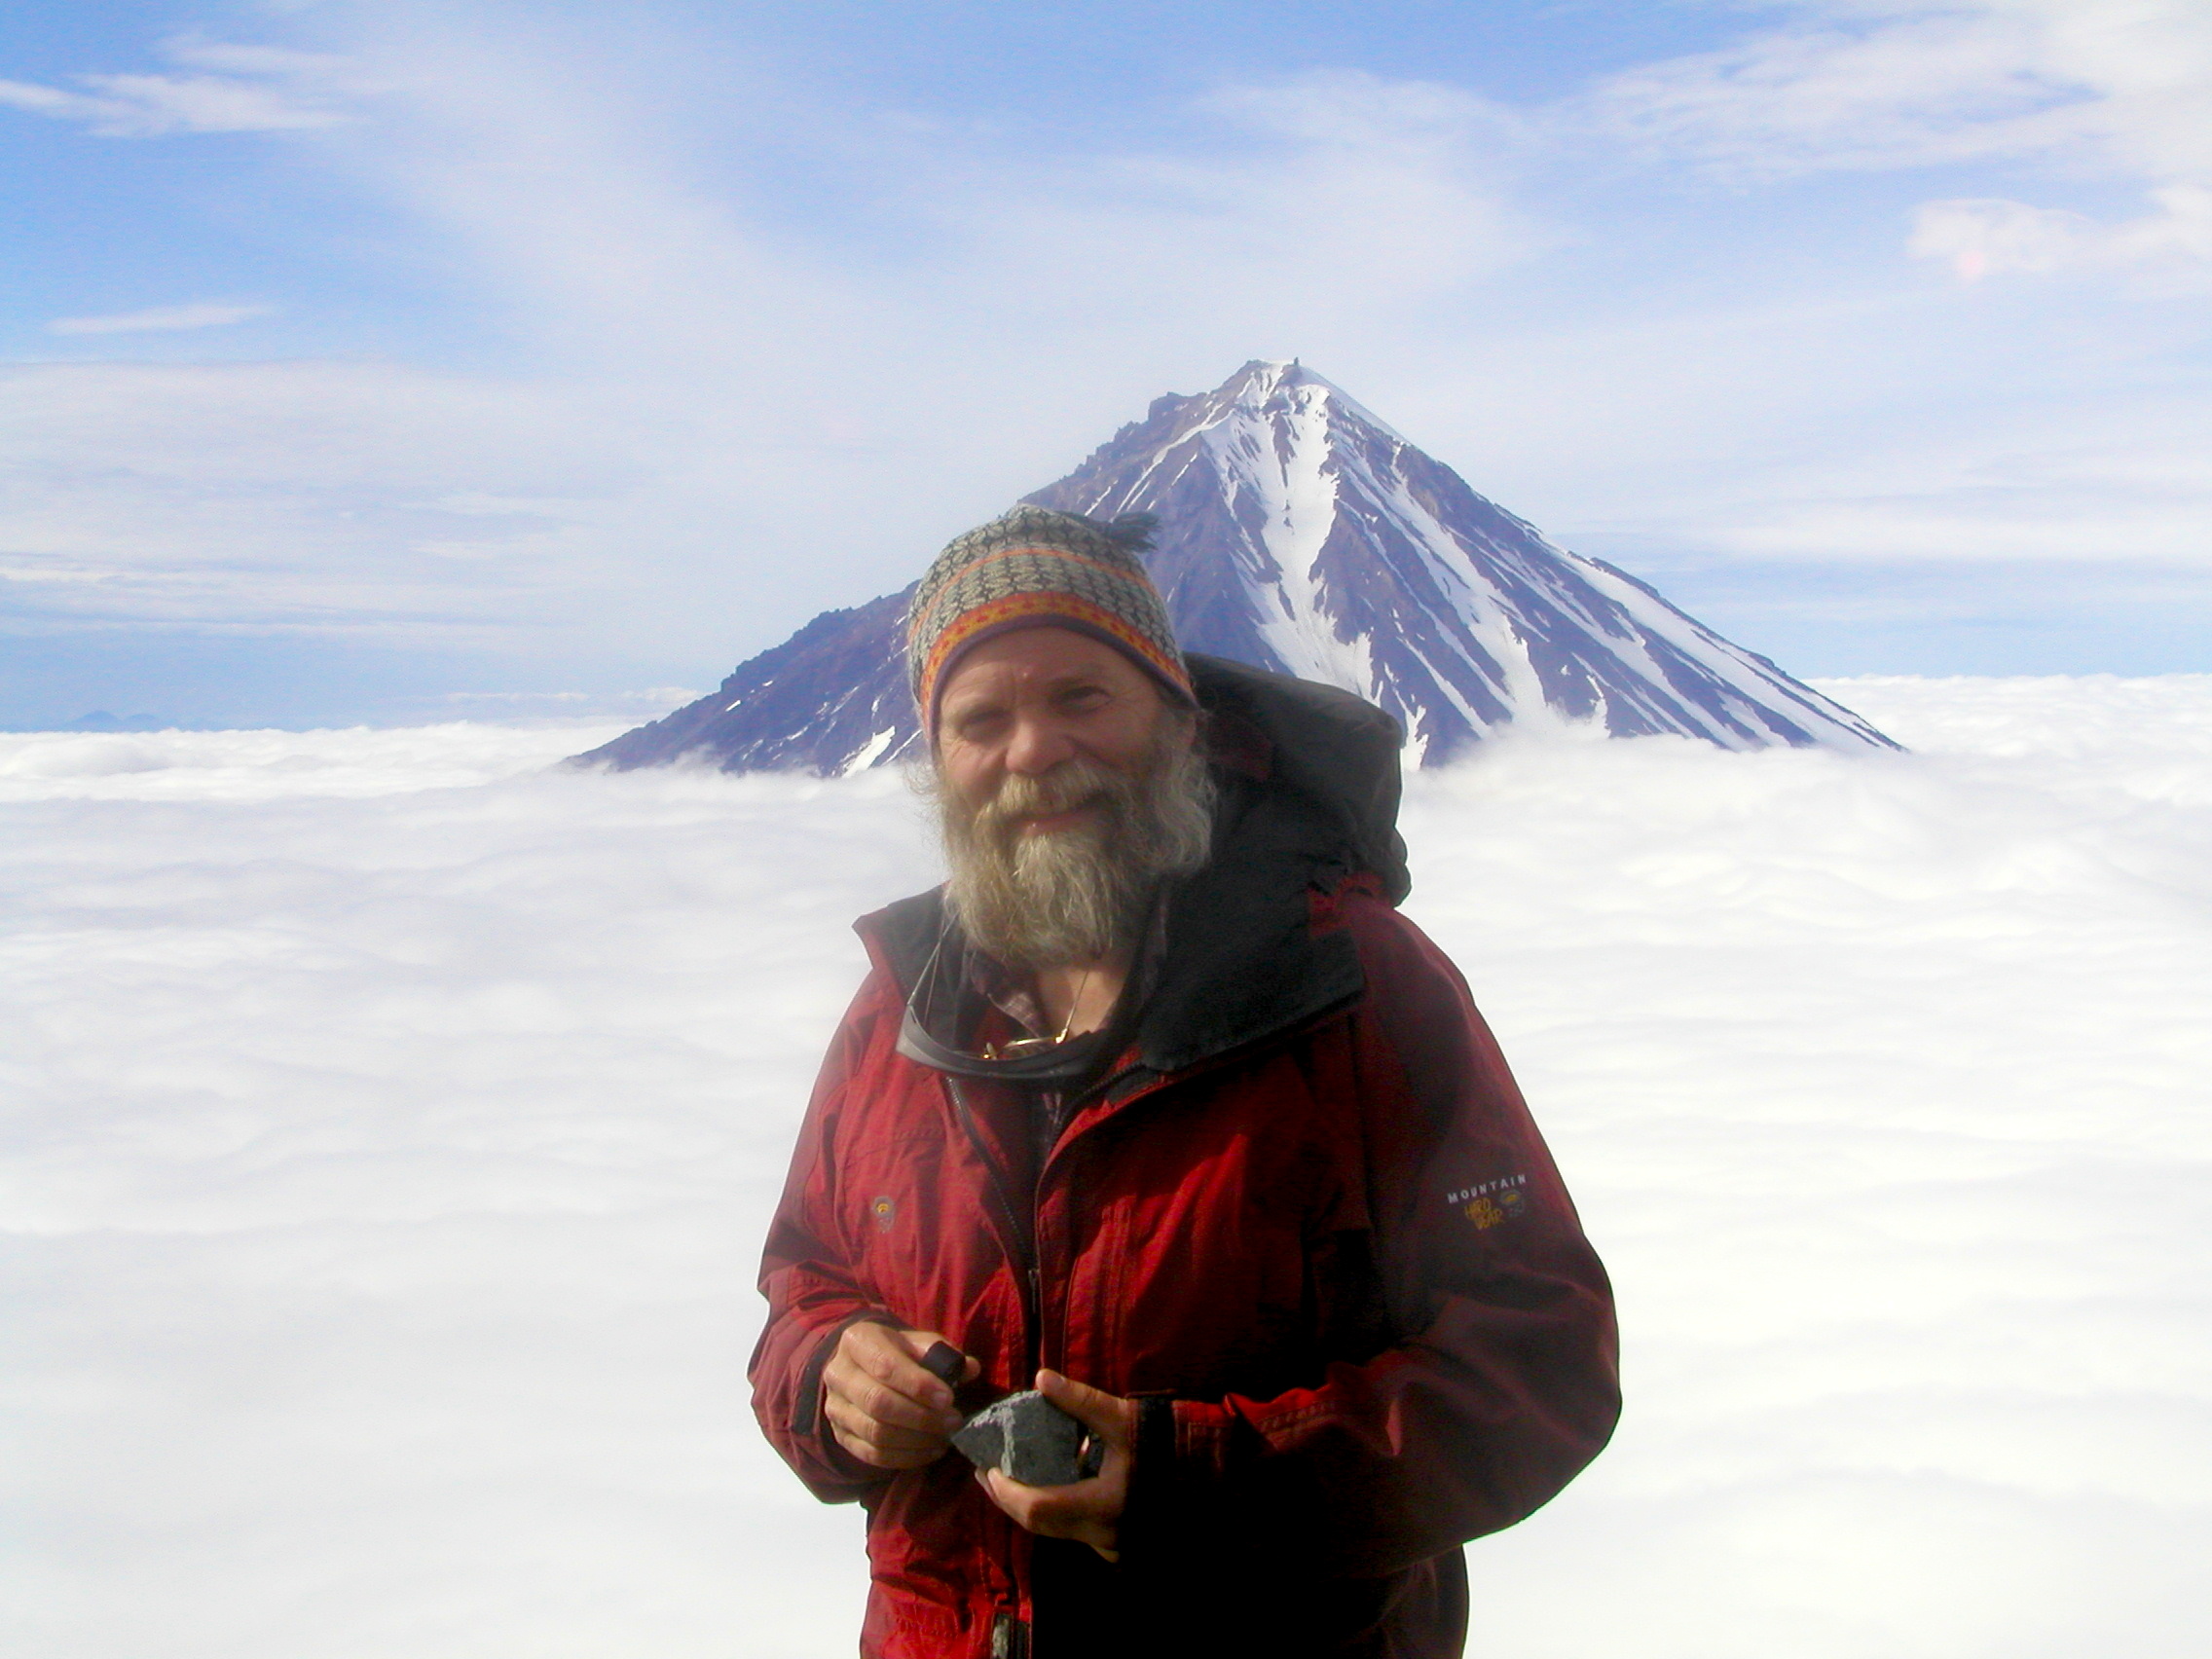 John Eichelberger with a volcano rising through the clouds behind him.